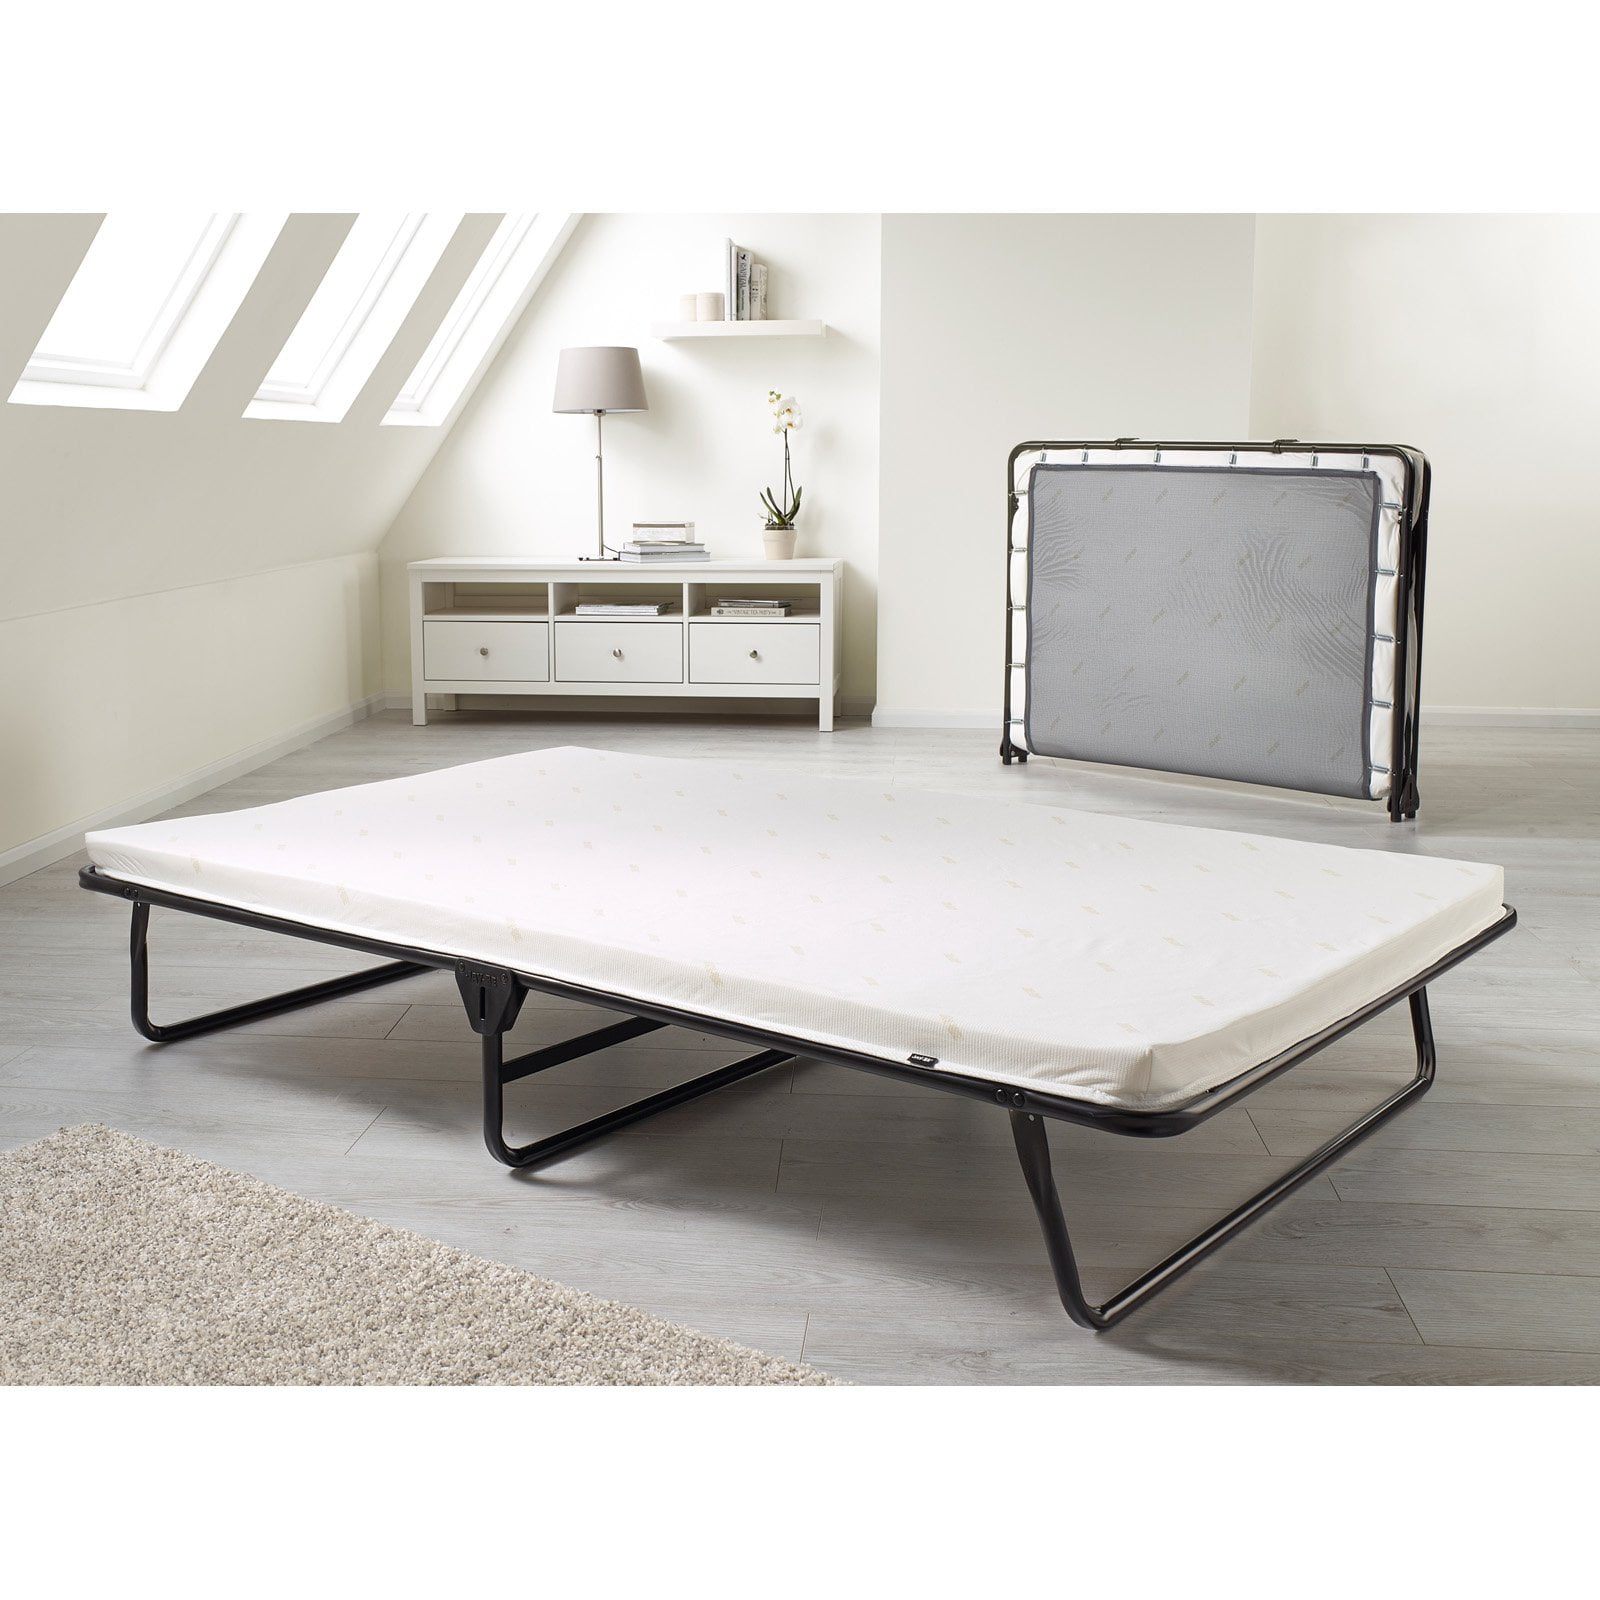 Jay Be Saver Memory Foam Folding Bed, Fold Up King Size Bed